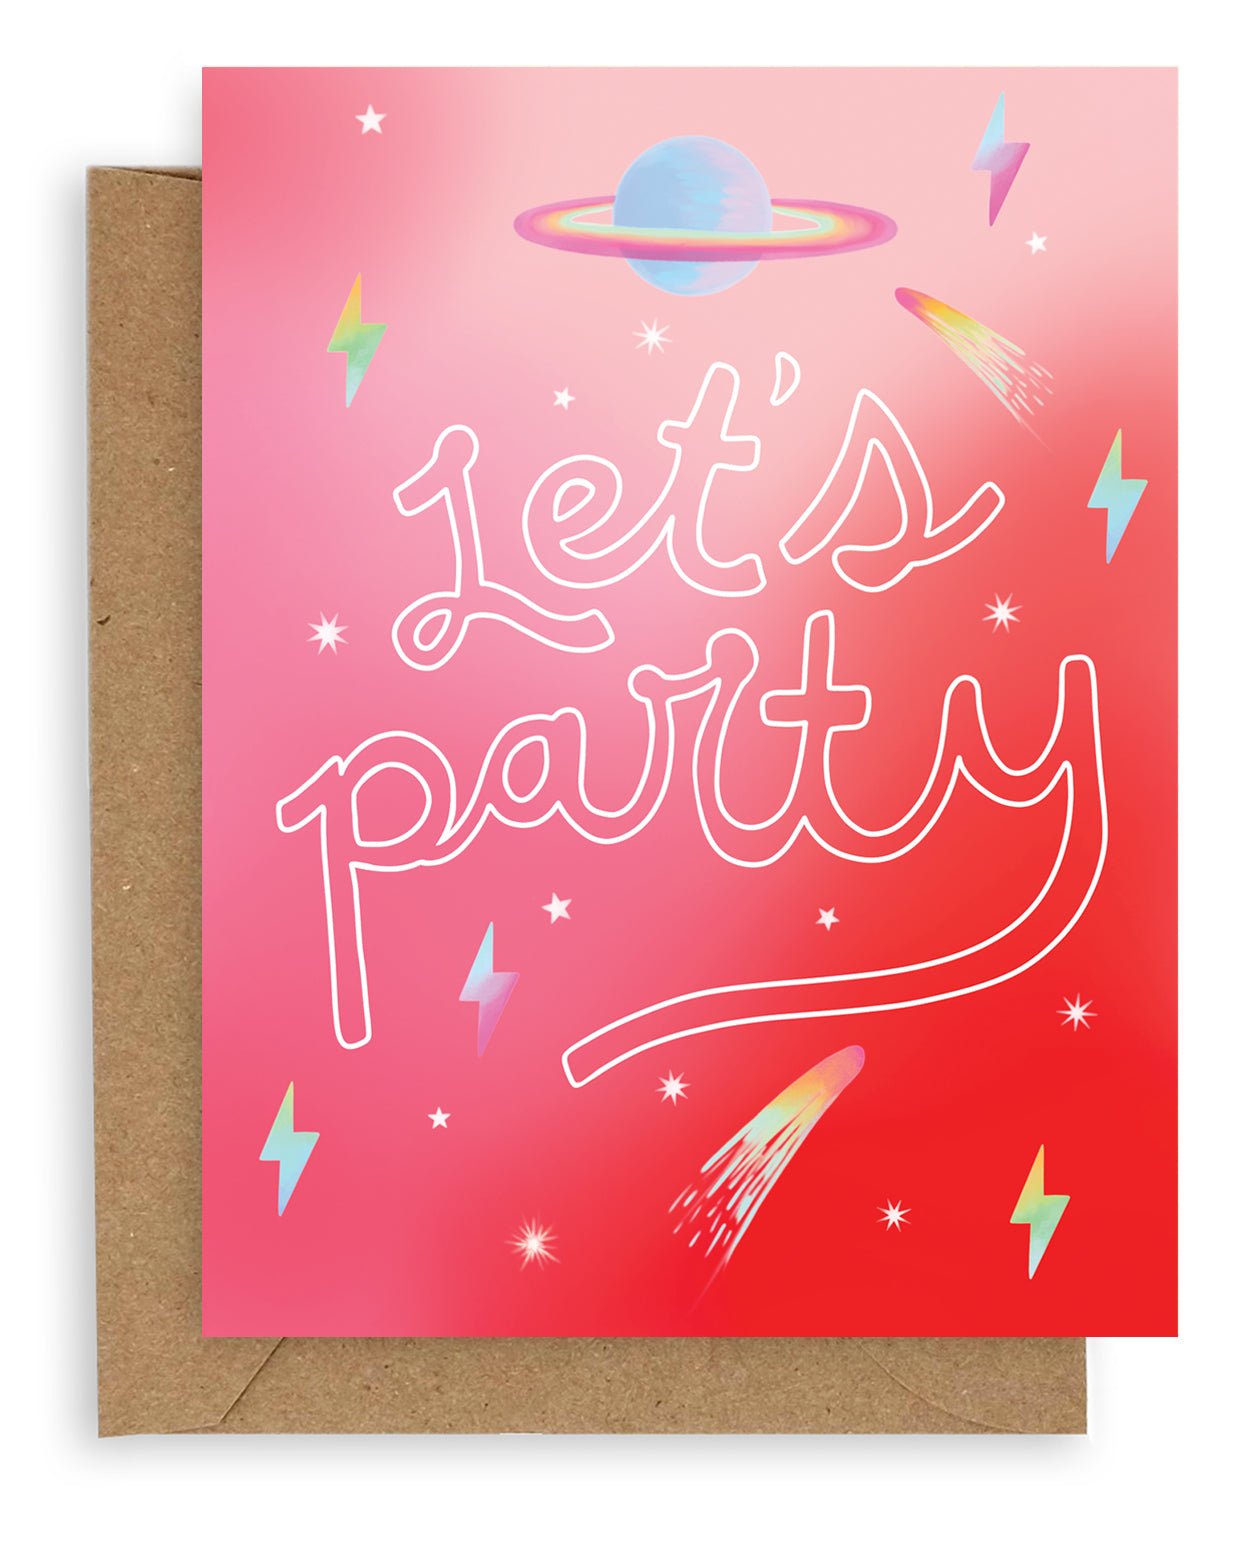 "Let's Party" printed in large cursive on an ombre red background with lightning bolts, still and shooting stars, and a blue Saturn design on a kraft envelope. 